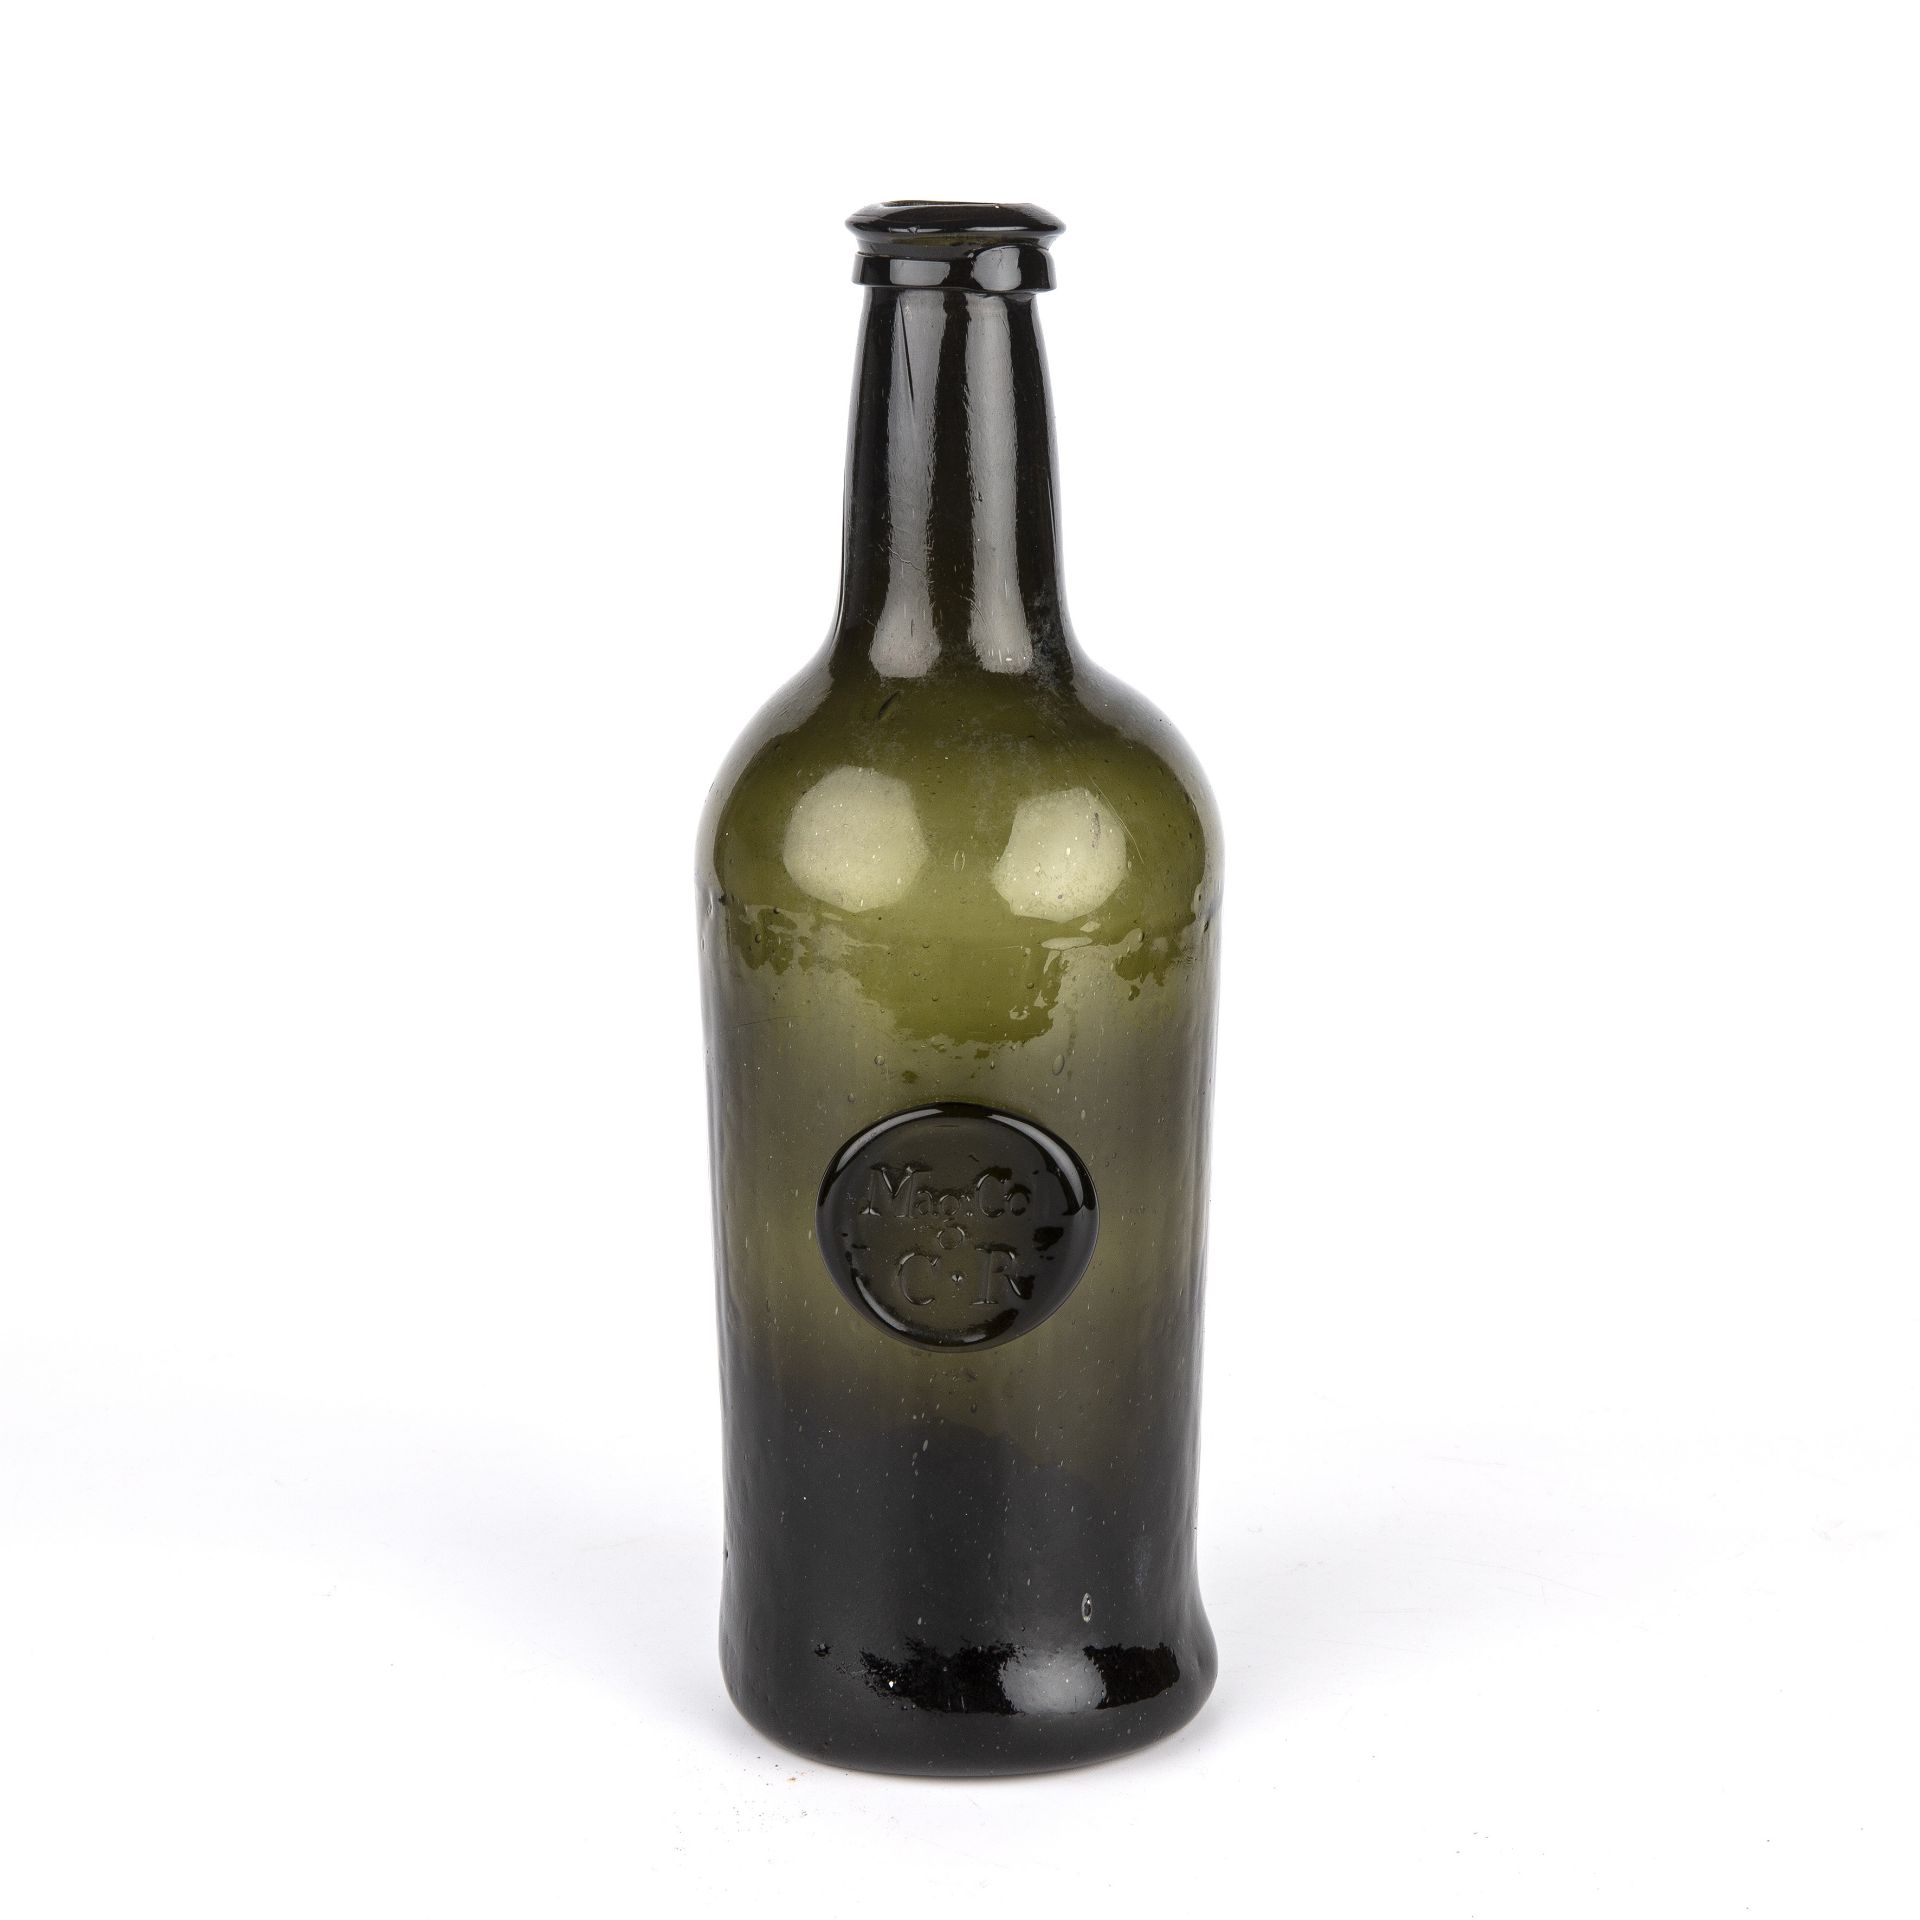 An 18th century Magdalen college green glass bottle, with a seal marked Mag.Col C.R circa 1770-80,